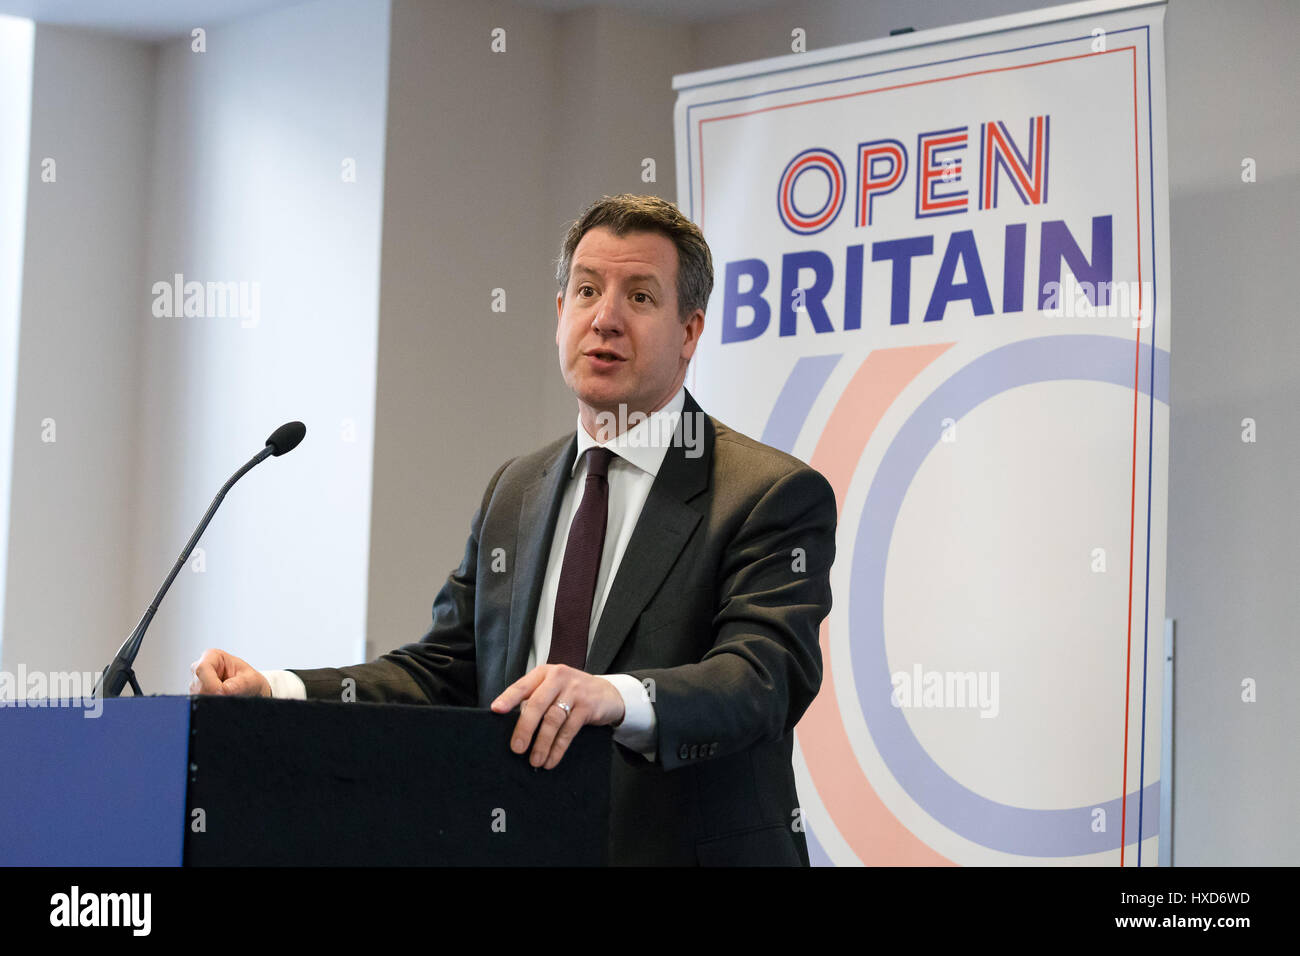 London, UK. 28th March 2017. Chris Leslie speaking at the Open Britain press conference. Leading supporters of the Open Britain campaign, Nicky Morgan MP, Chris Leslie MP and Nick Clegg MP hosted a press conference in which they answered questions about the Open Britain campaign’s publication: The Government’s Brexit Contract with the British people. Credit: Vickie Flores/Alamy Live News Stock Photo